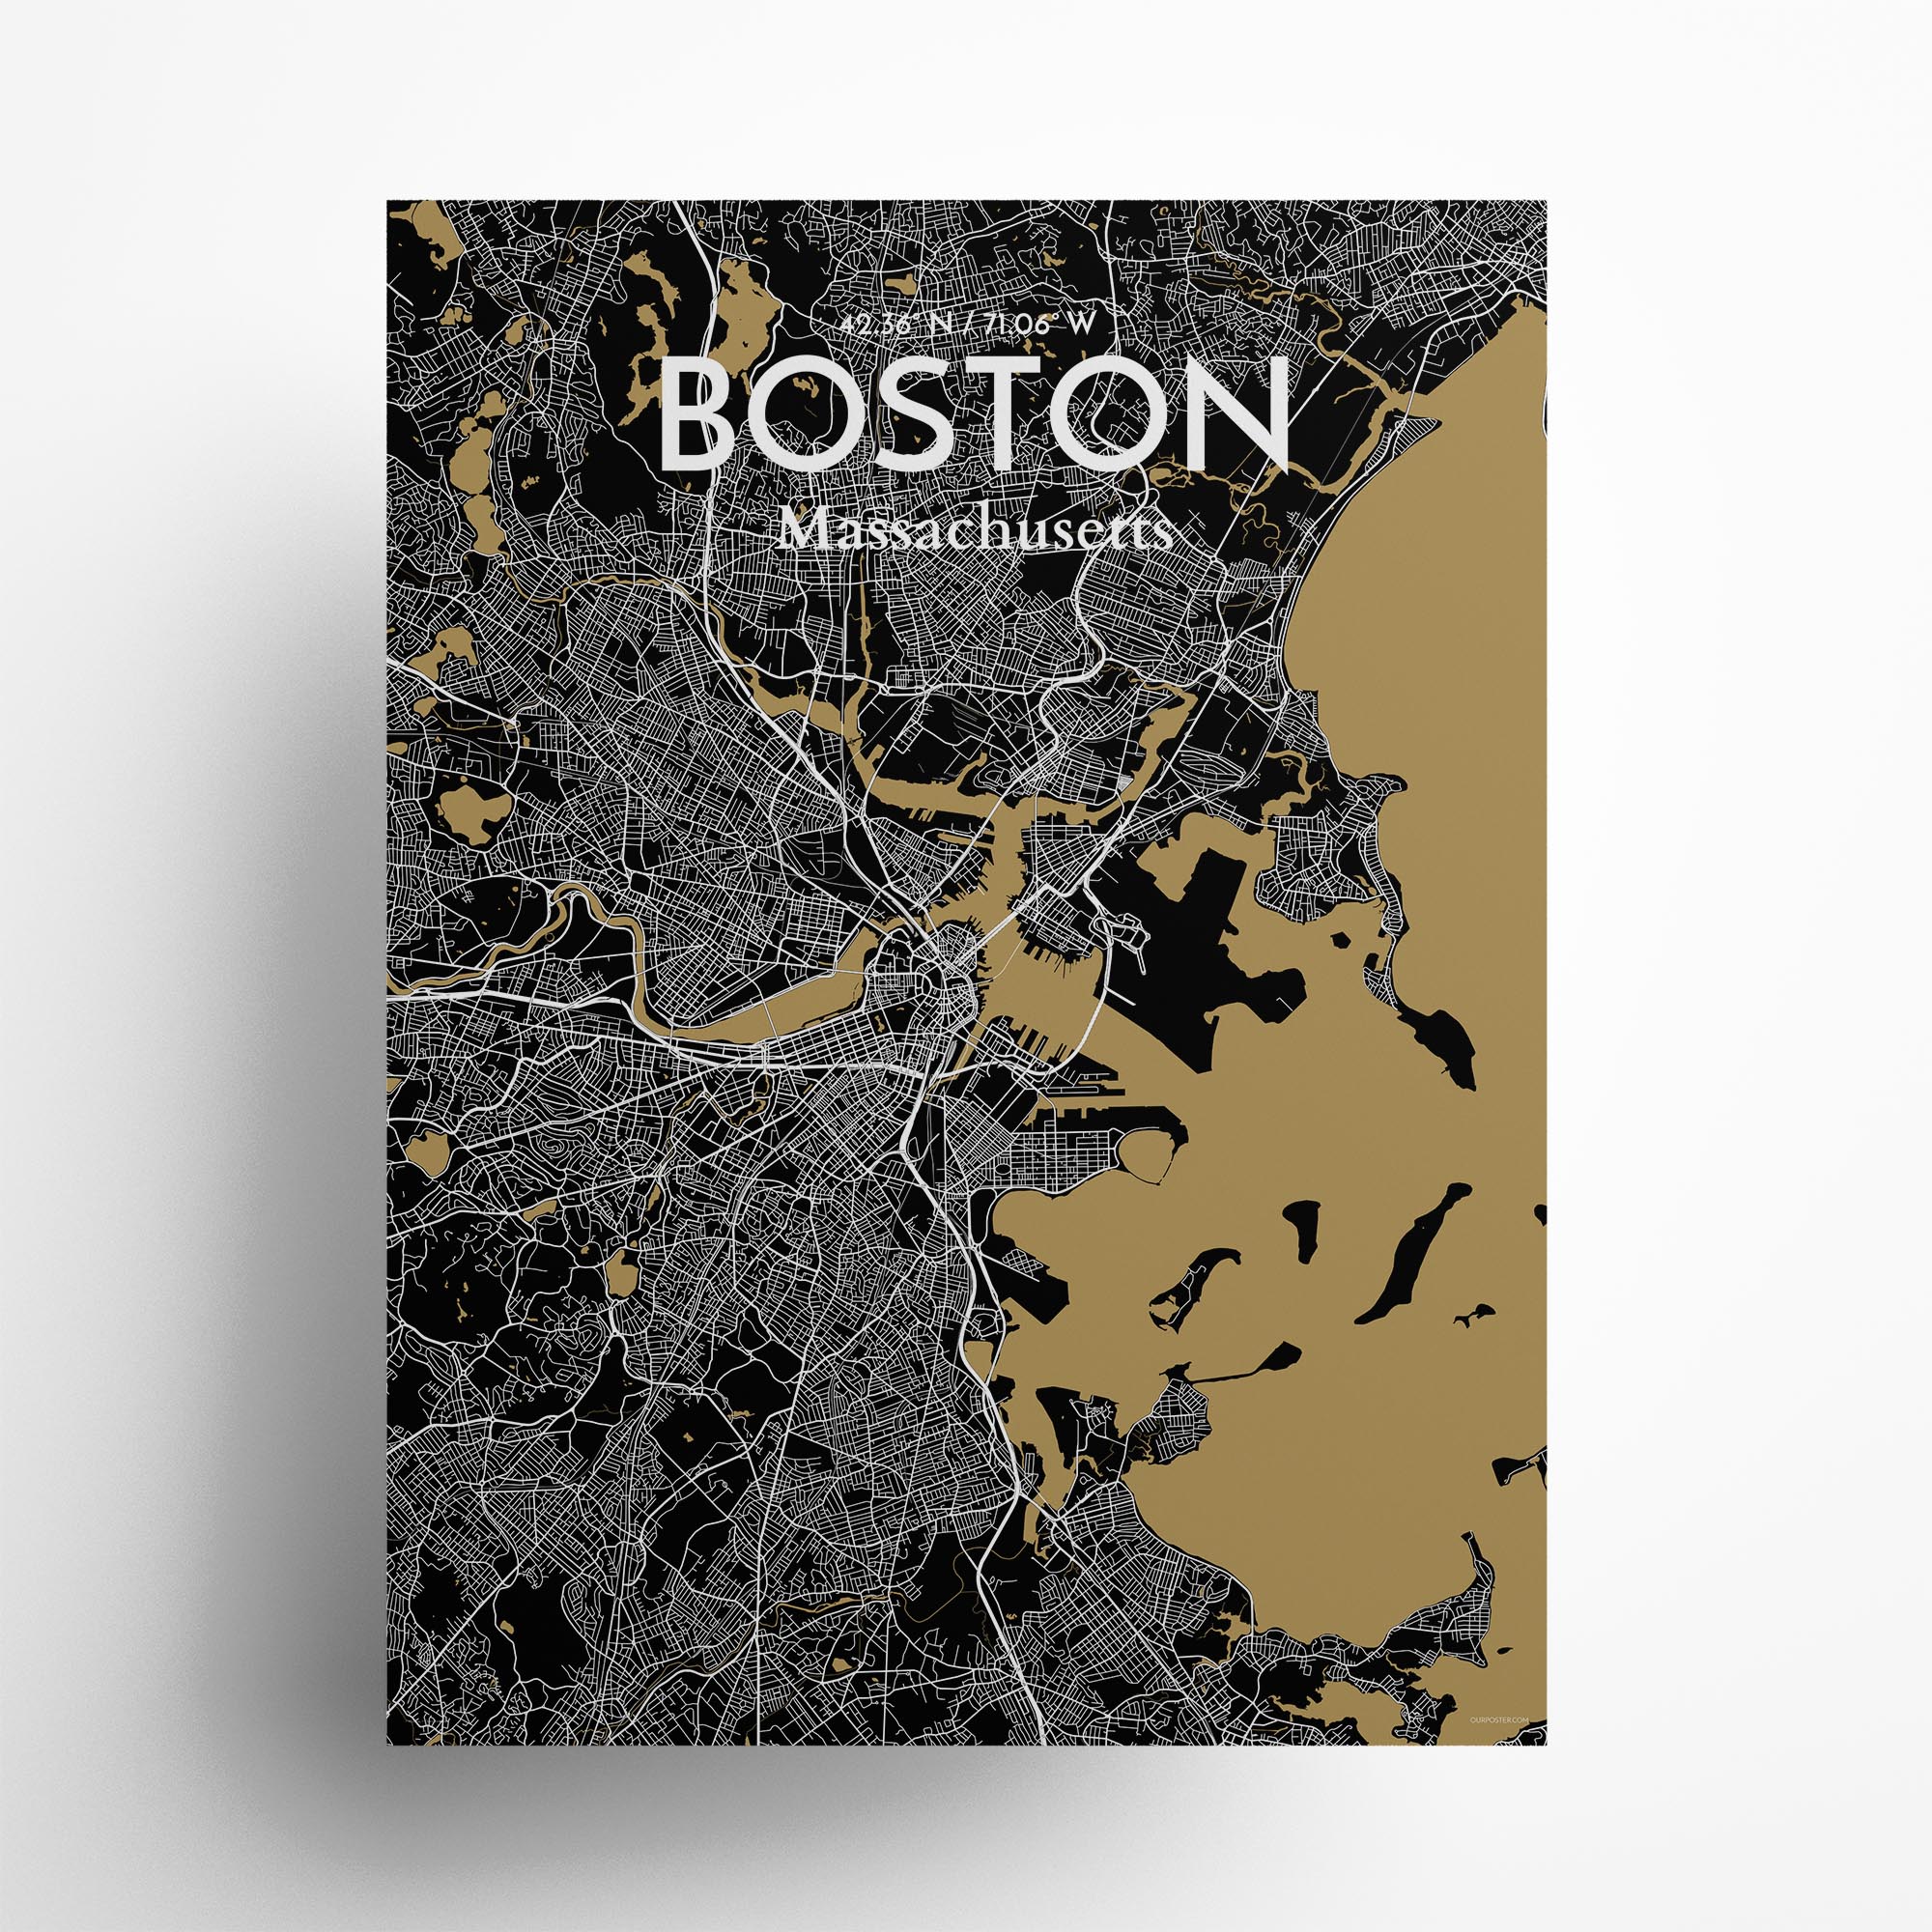 Boston city map poster in Luxe of size 18" x 24"